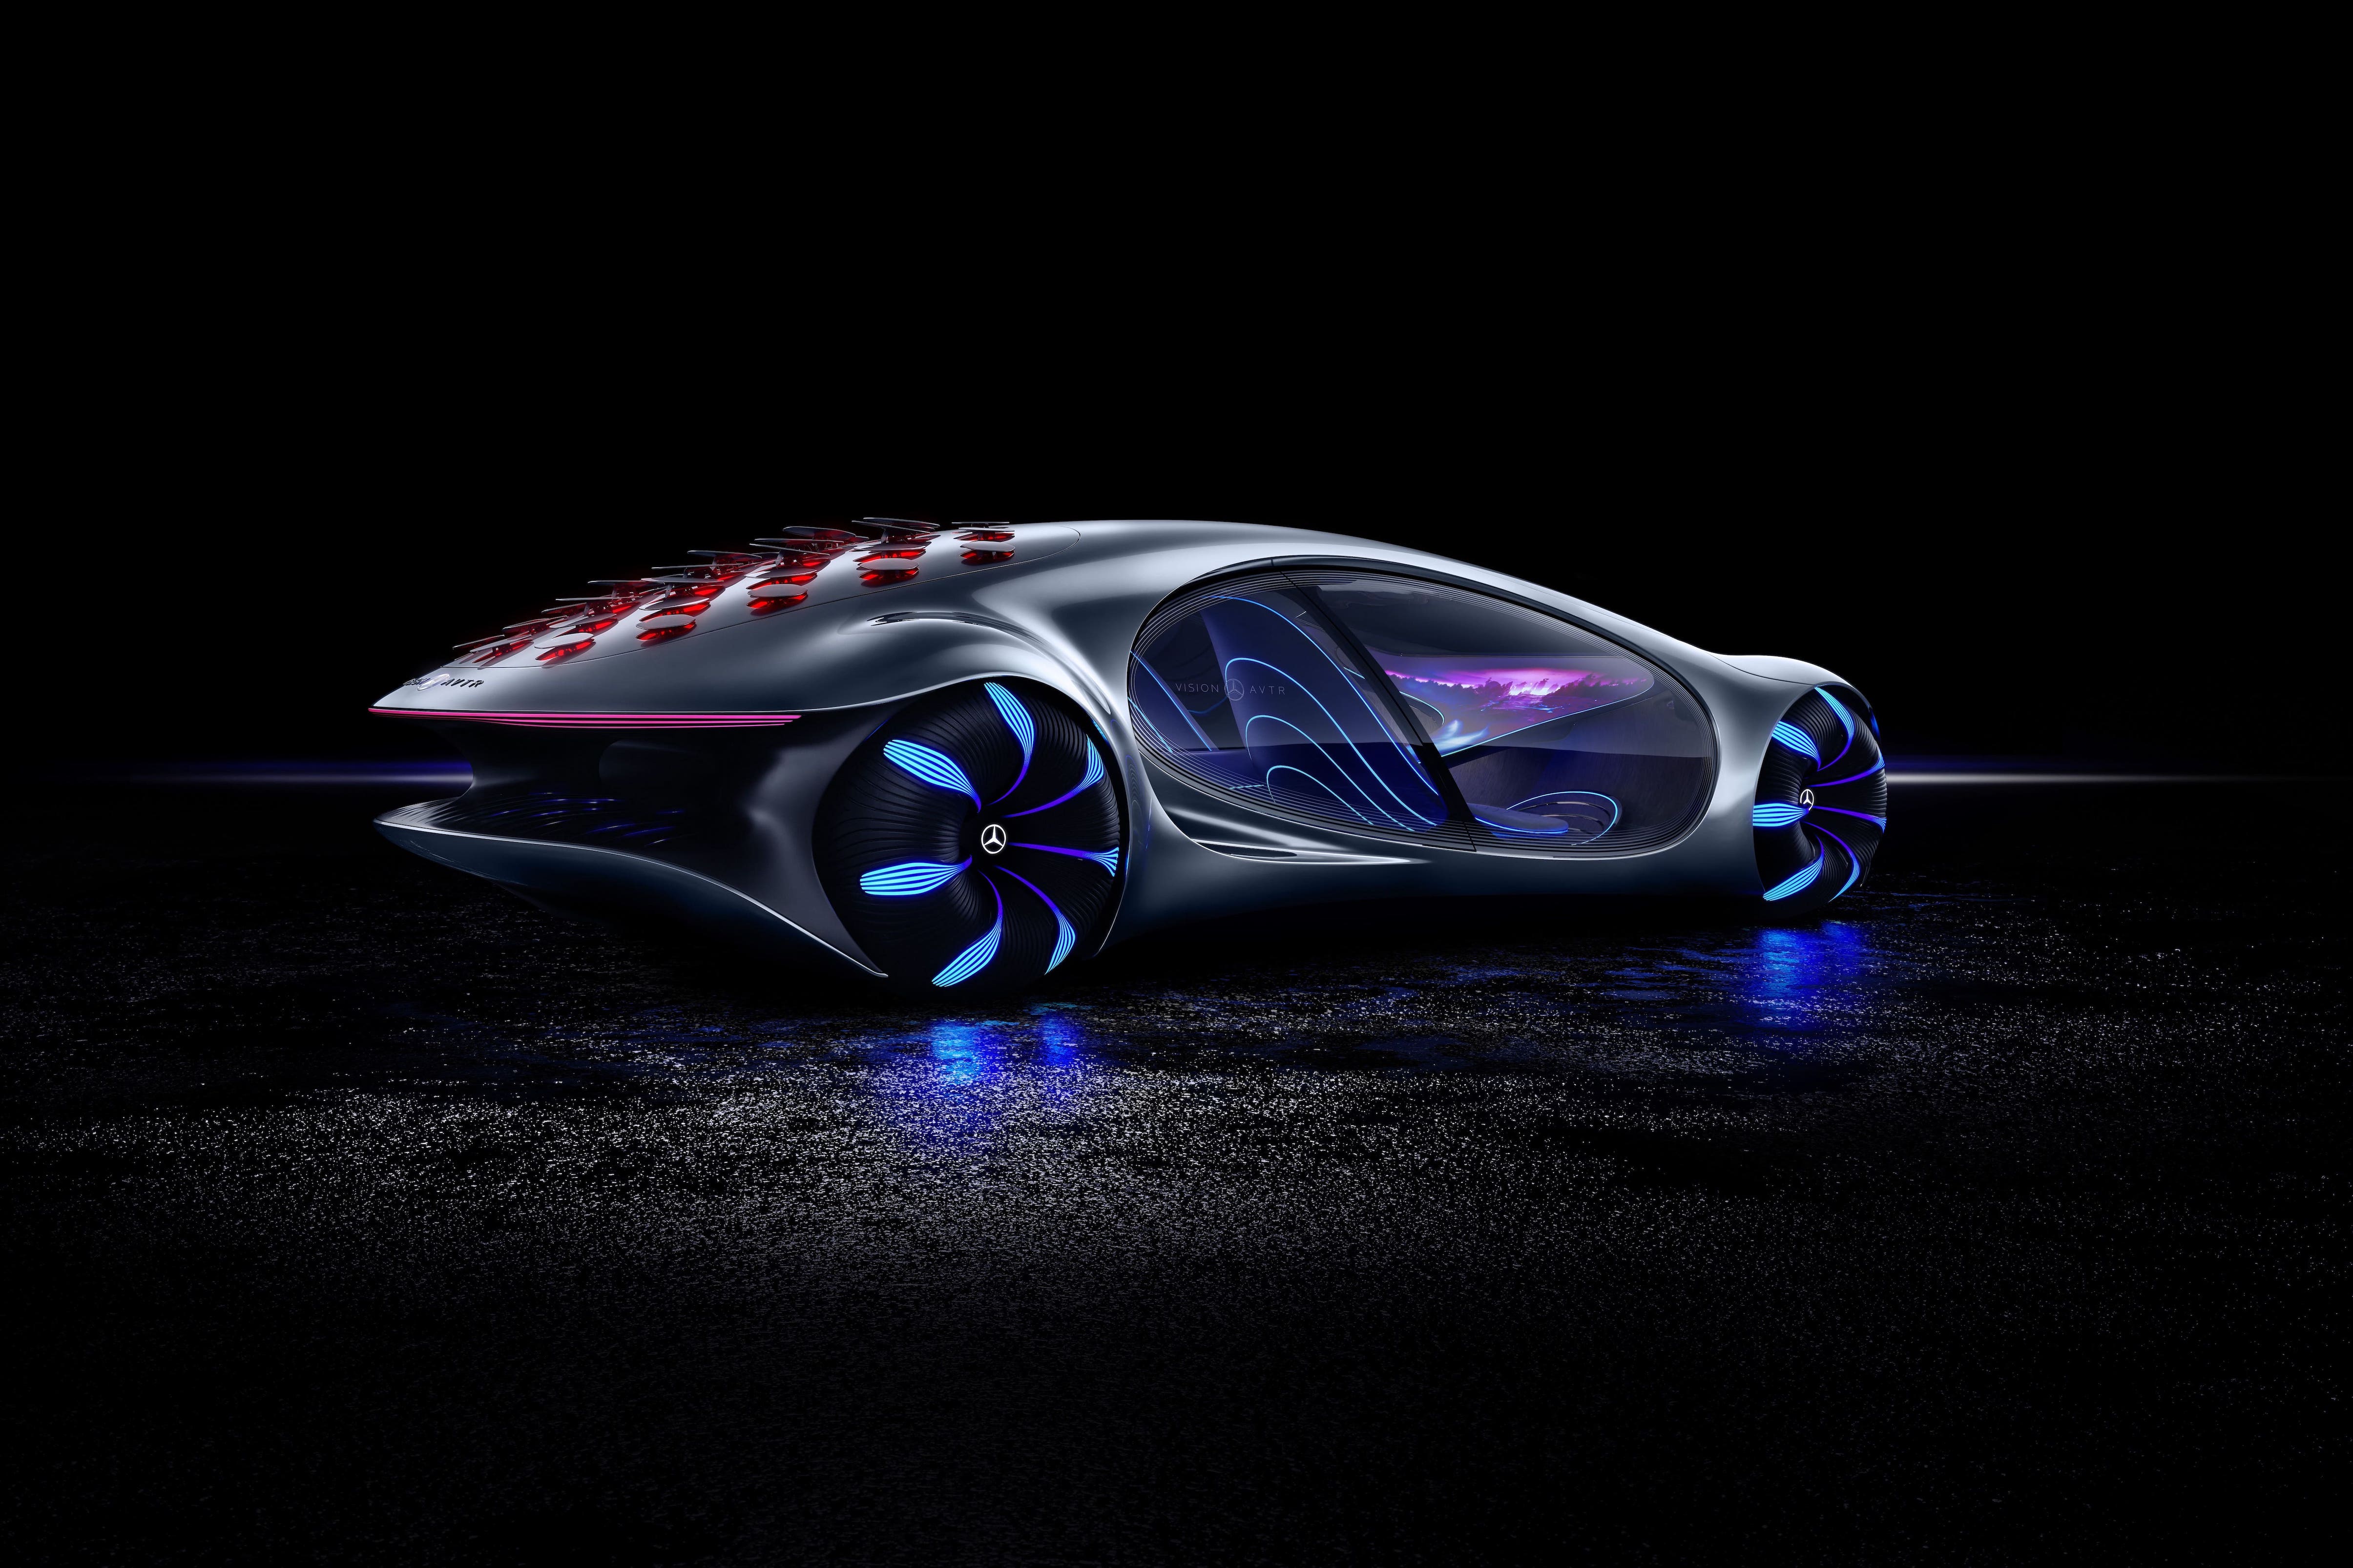 Mercedes-Benz VISION AVTR Future Concept Car Set to Inspire, Excite and Amaze Visitors at GITEX